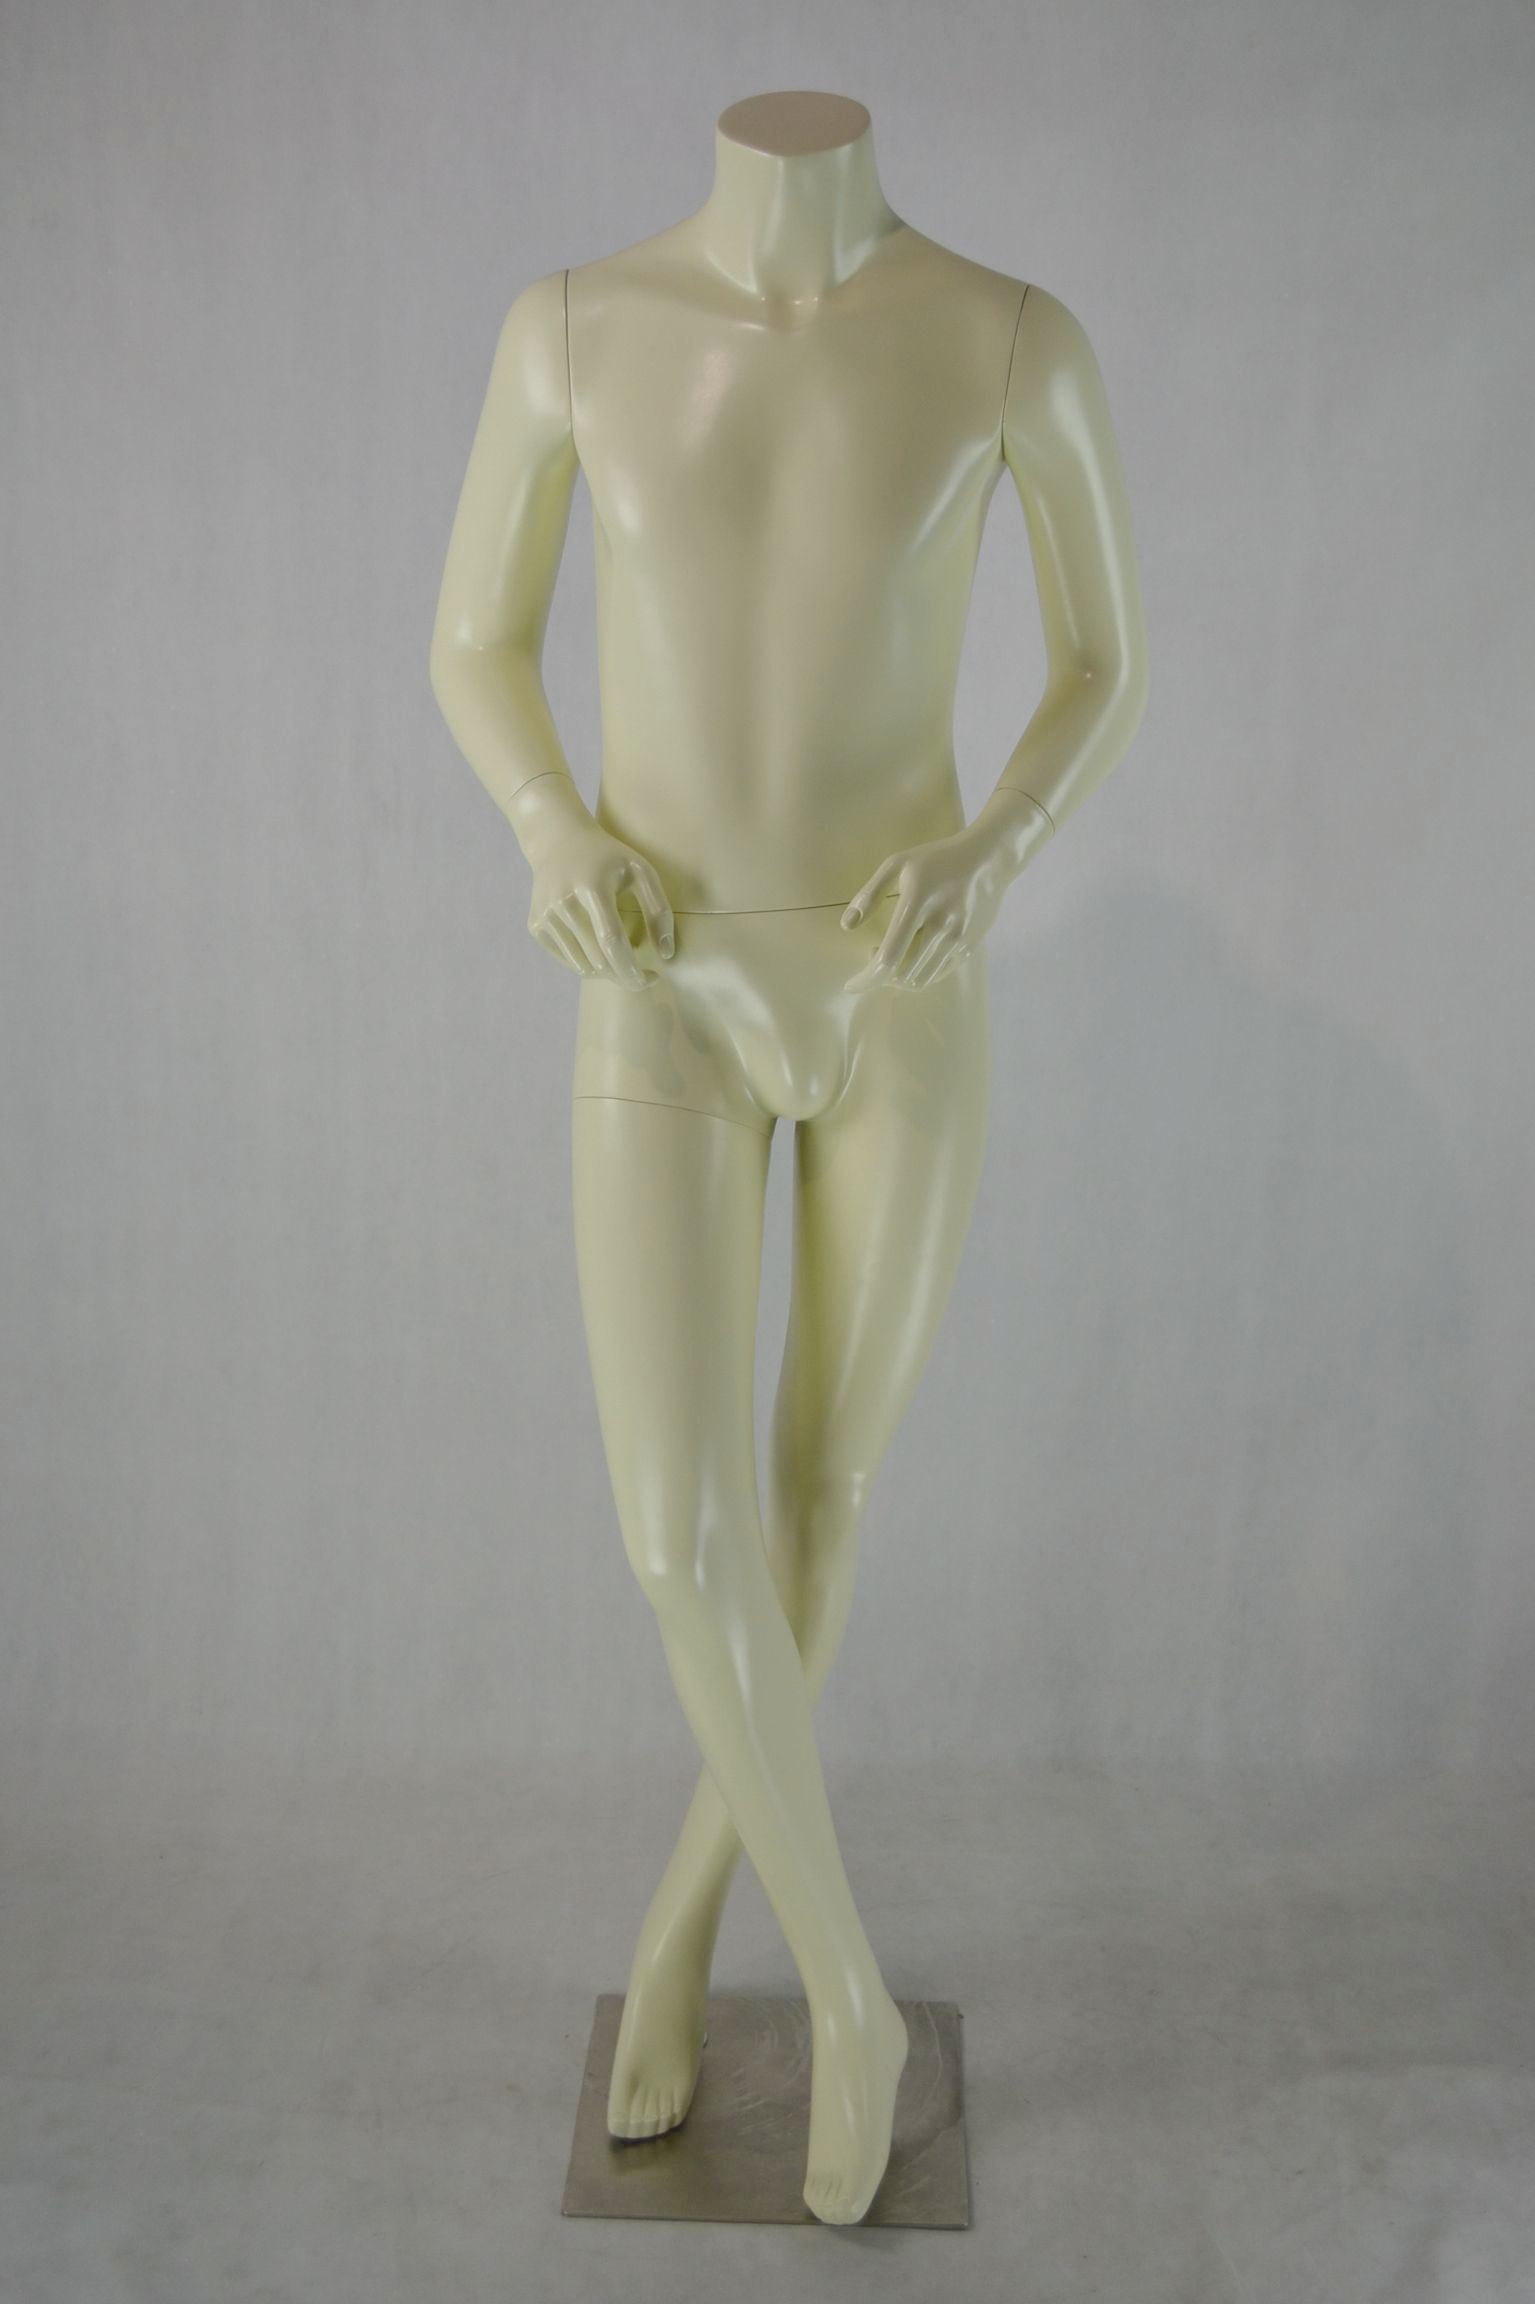 Plus Size Male Mannequin for Windows Display